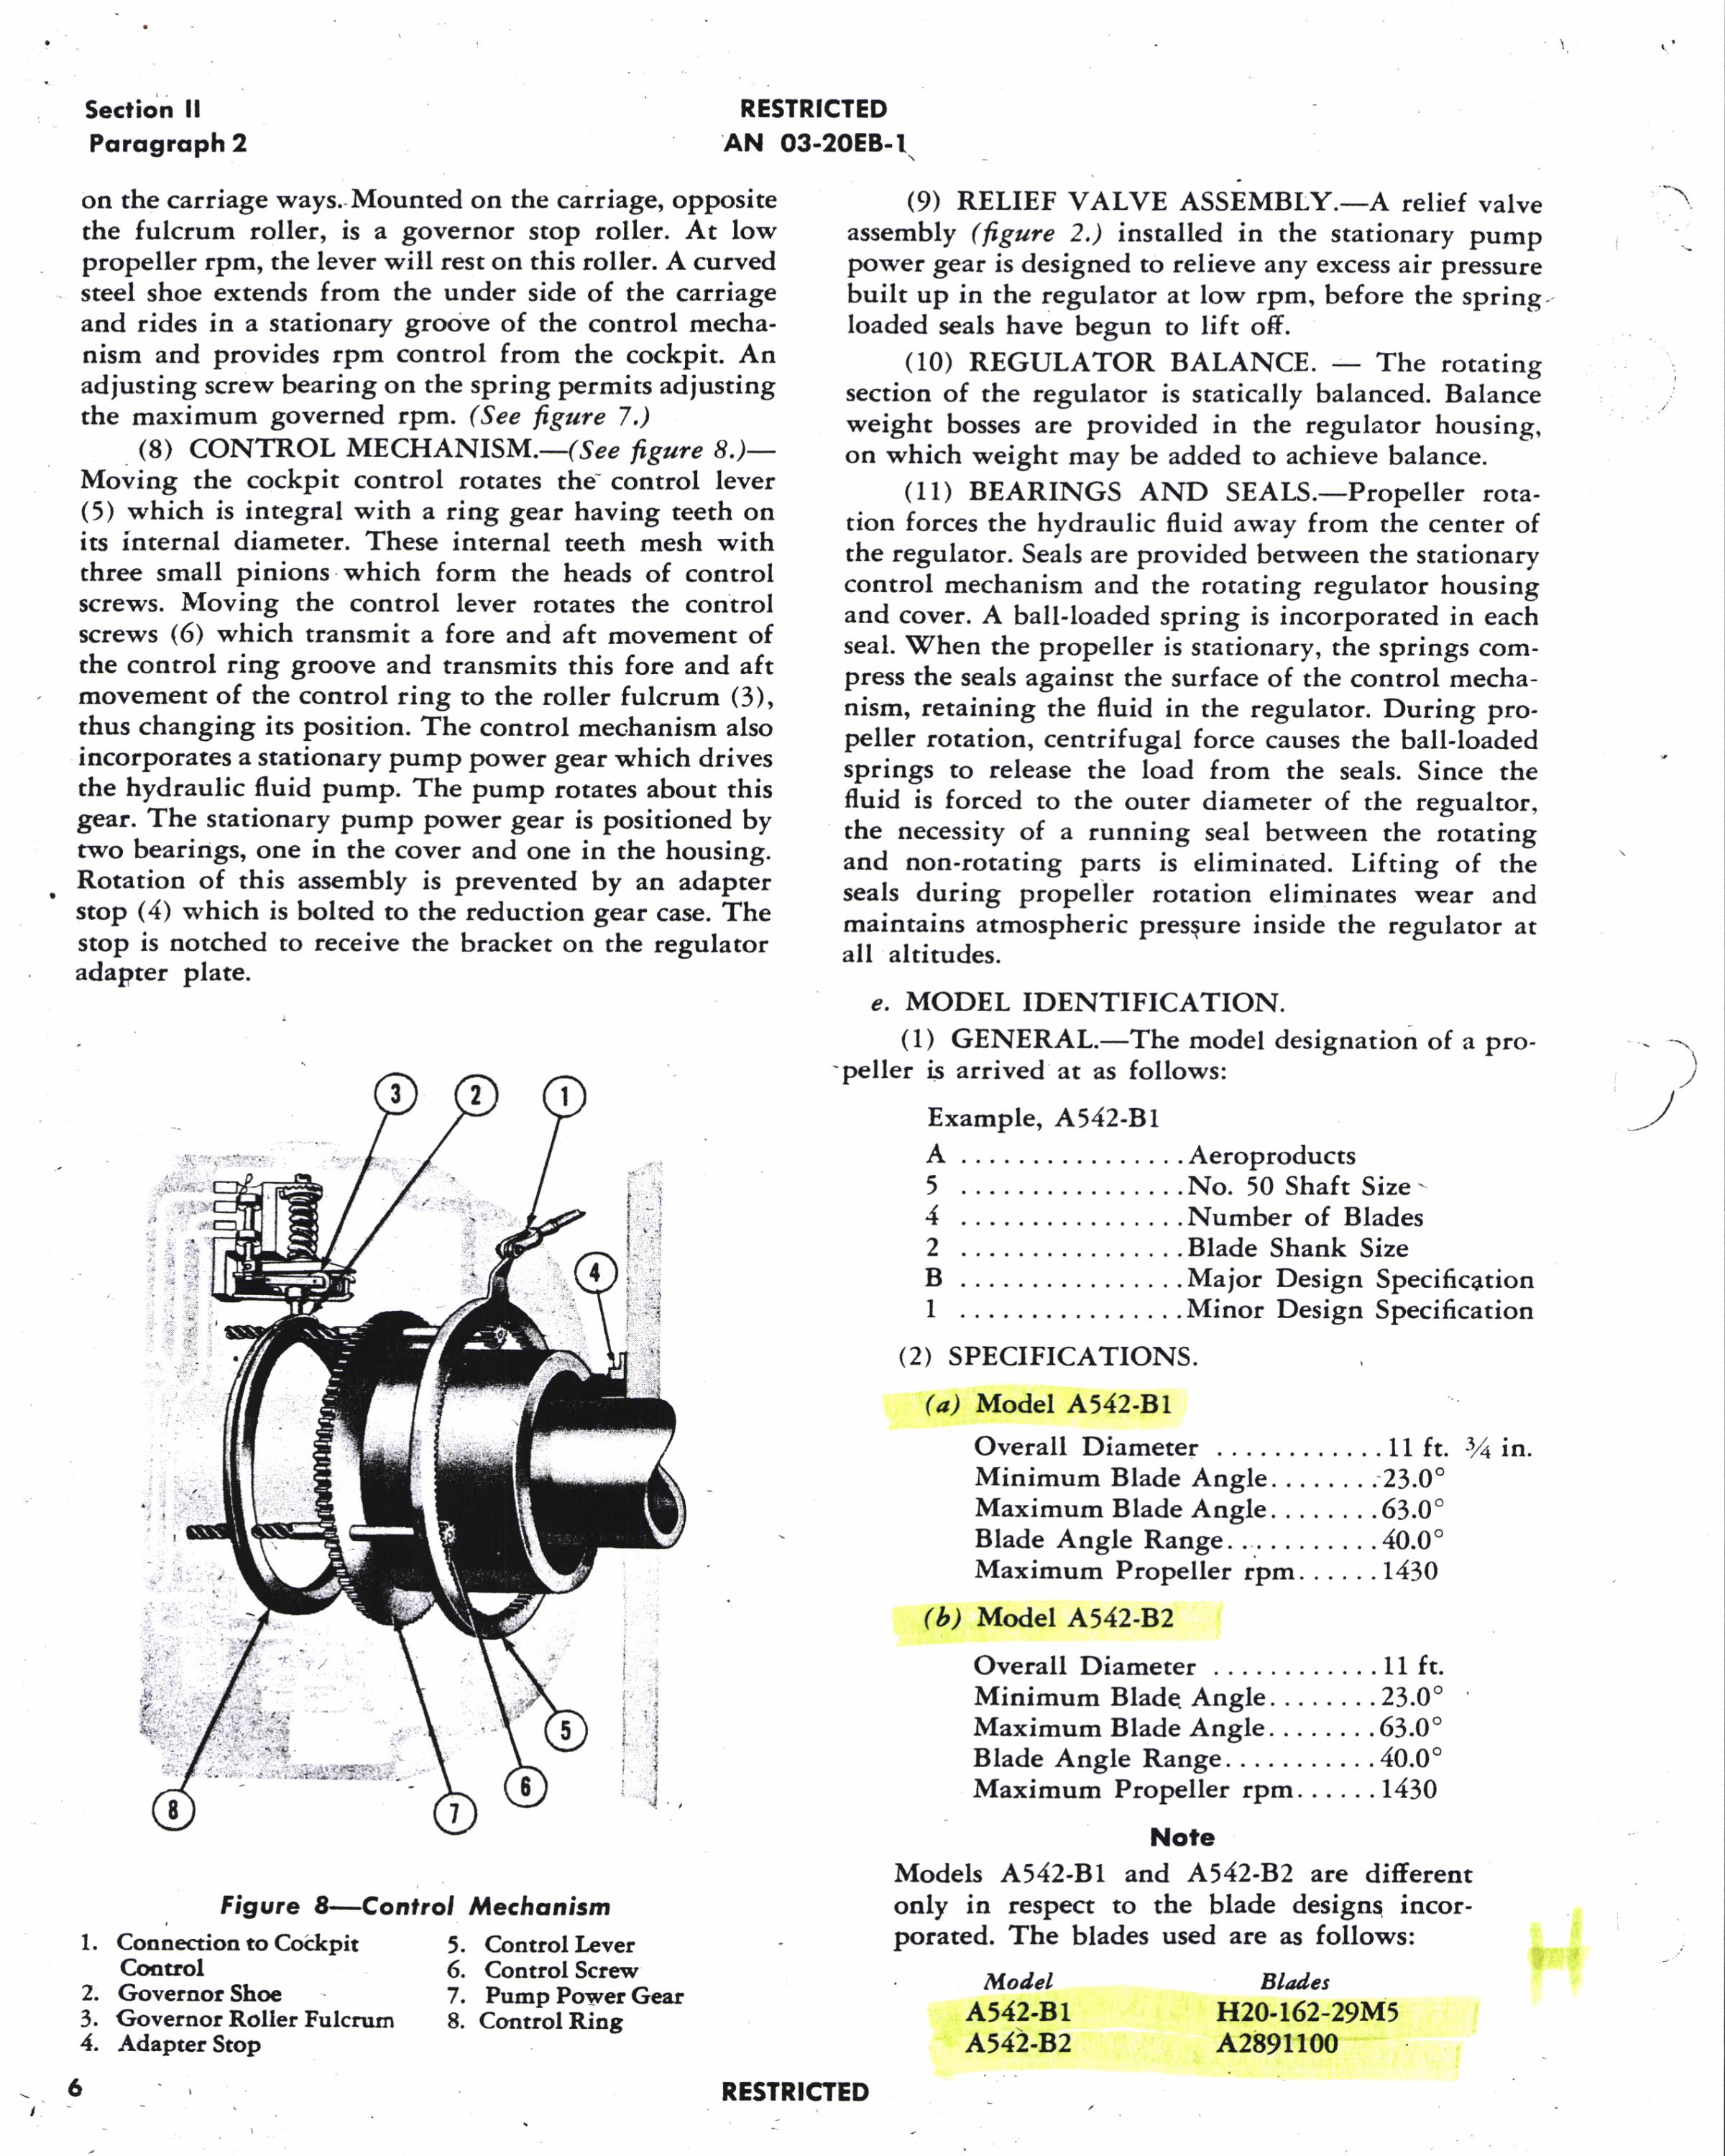 Sample page 7 from AirCorps Library document: Handbook of Instructions with Parts Catalog for Hydraulic Controllable Propellers Models A542-B1 and -B2